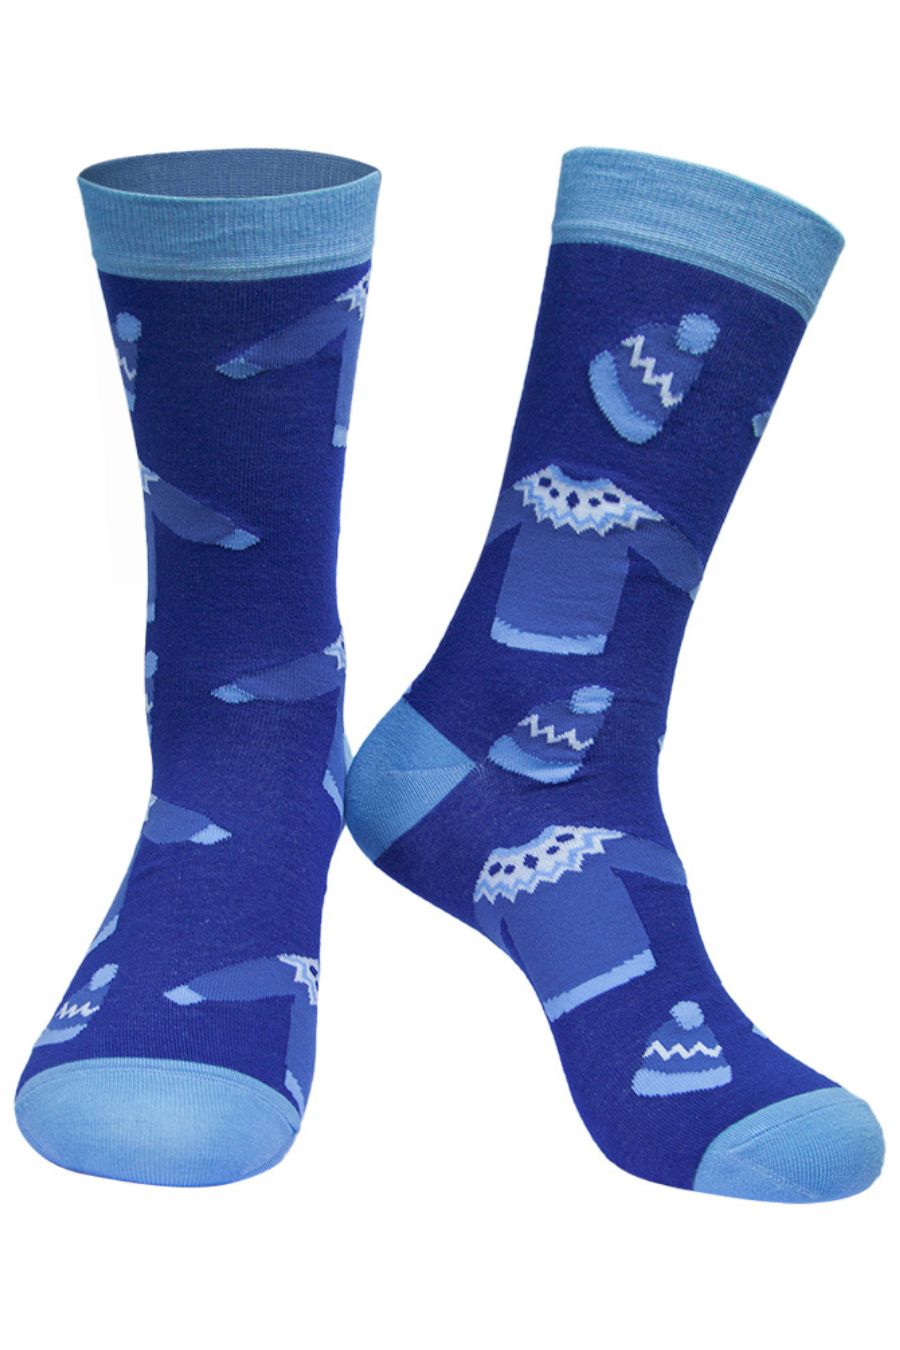 men's blue dress socks with a pattern of winter sweaters and hats